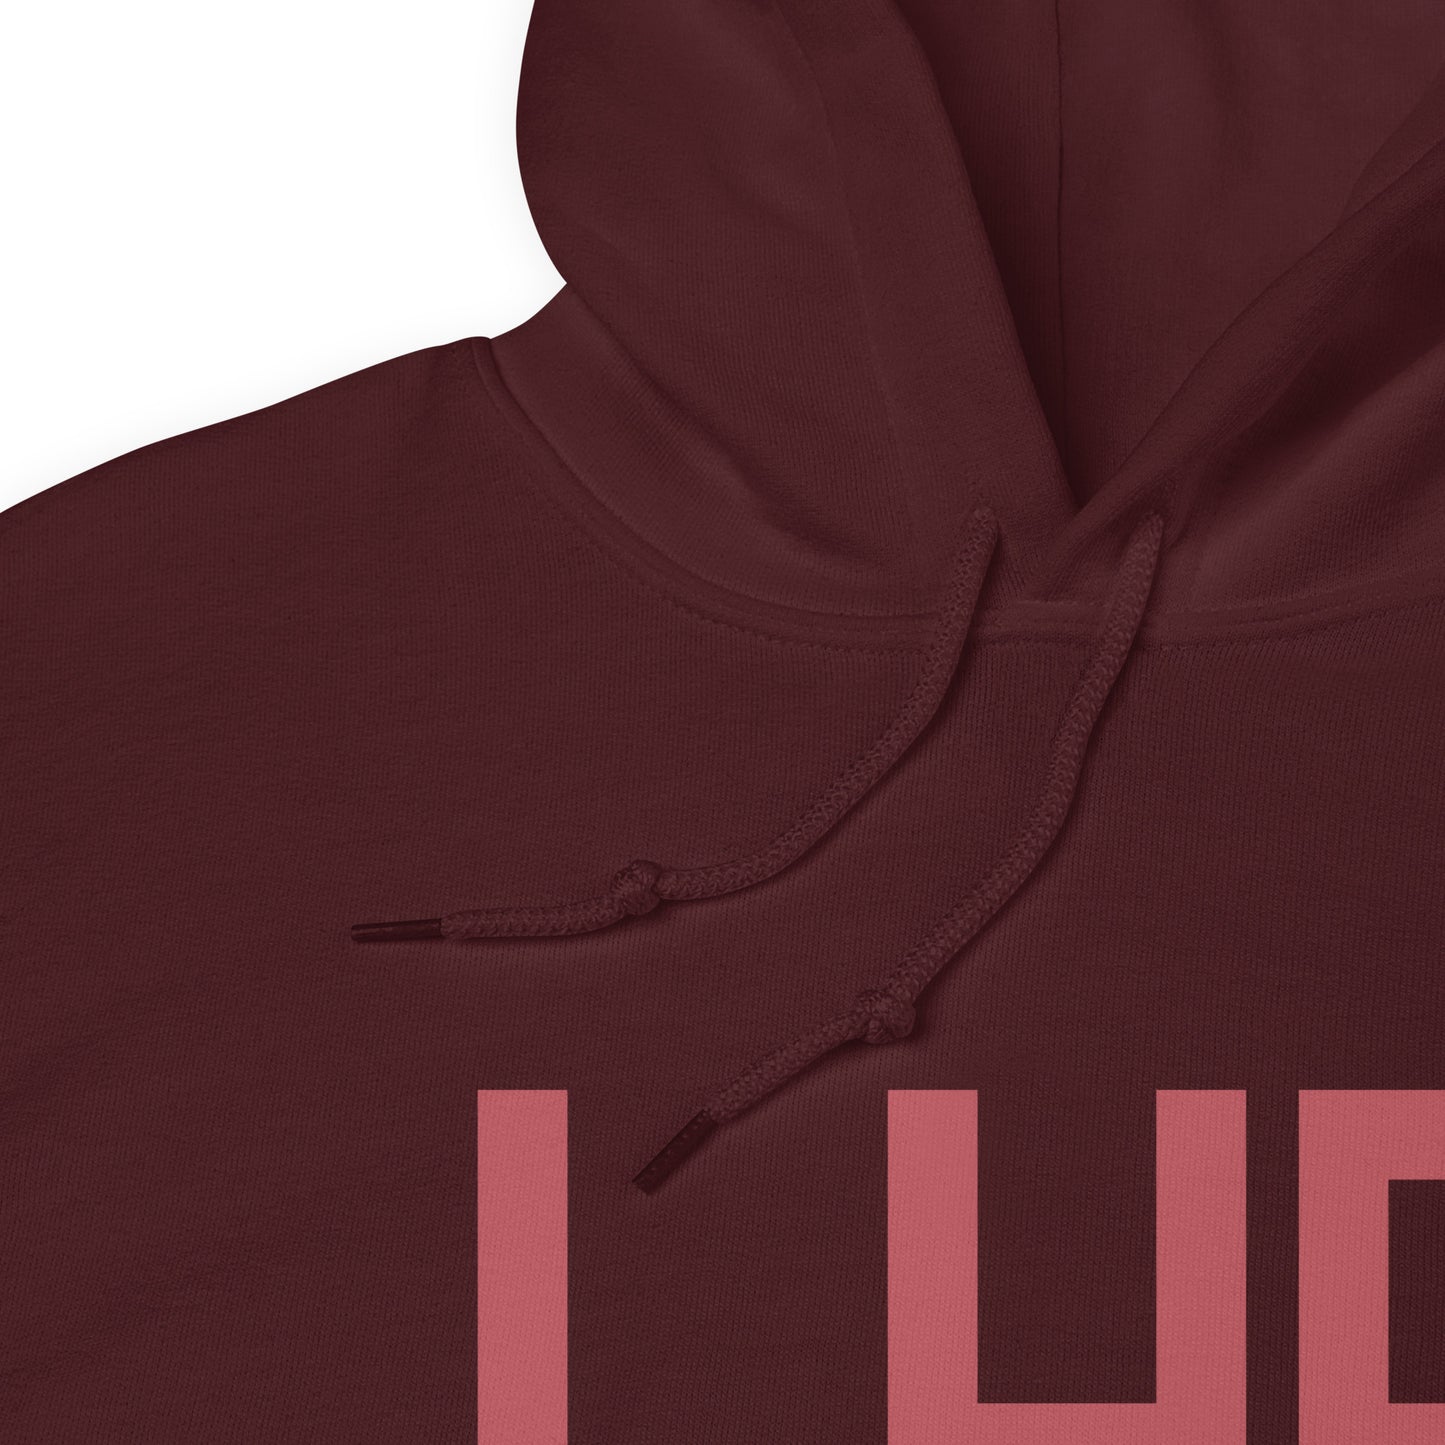 Aviation Enthusiast Hoodie - Deep Pink Graphic • LHR London • YHM Designs - Image 08